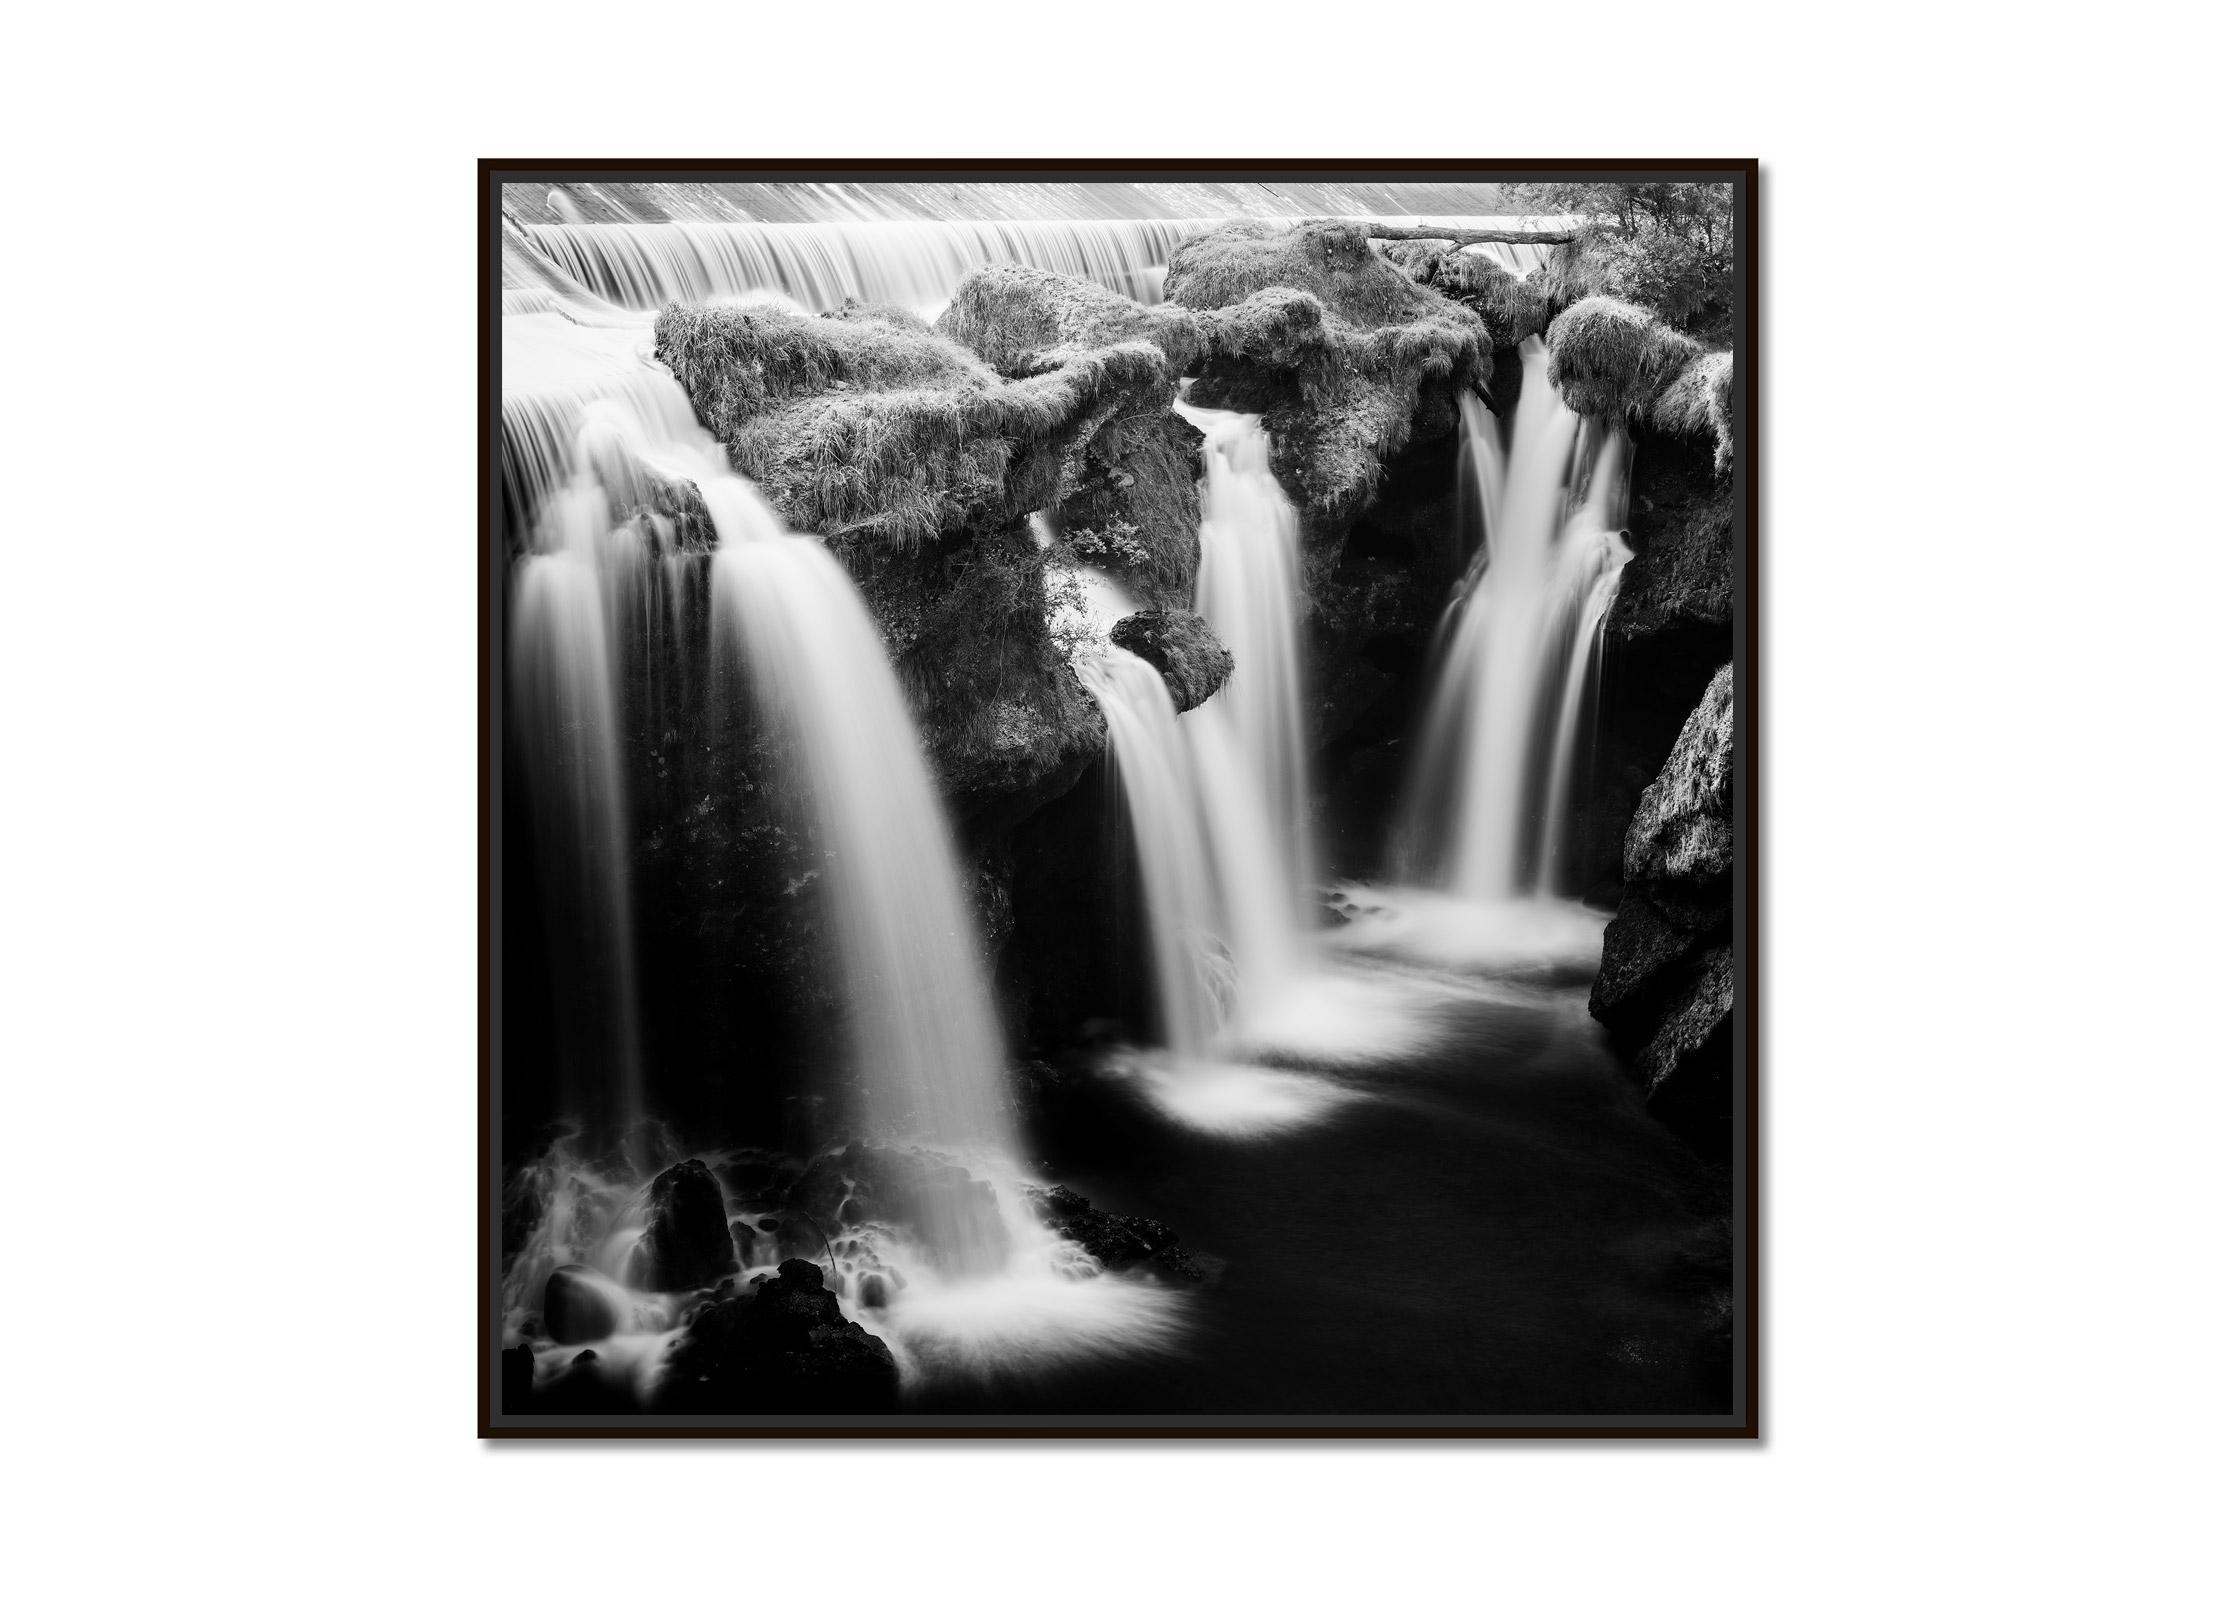 Fahrbahren Fall, Waterfall, black and white long exposure landscape photography - Photograph by Gerald Berghammer